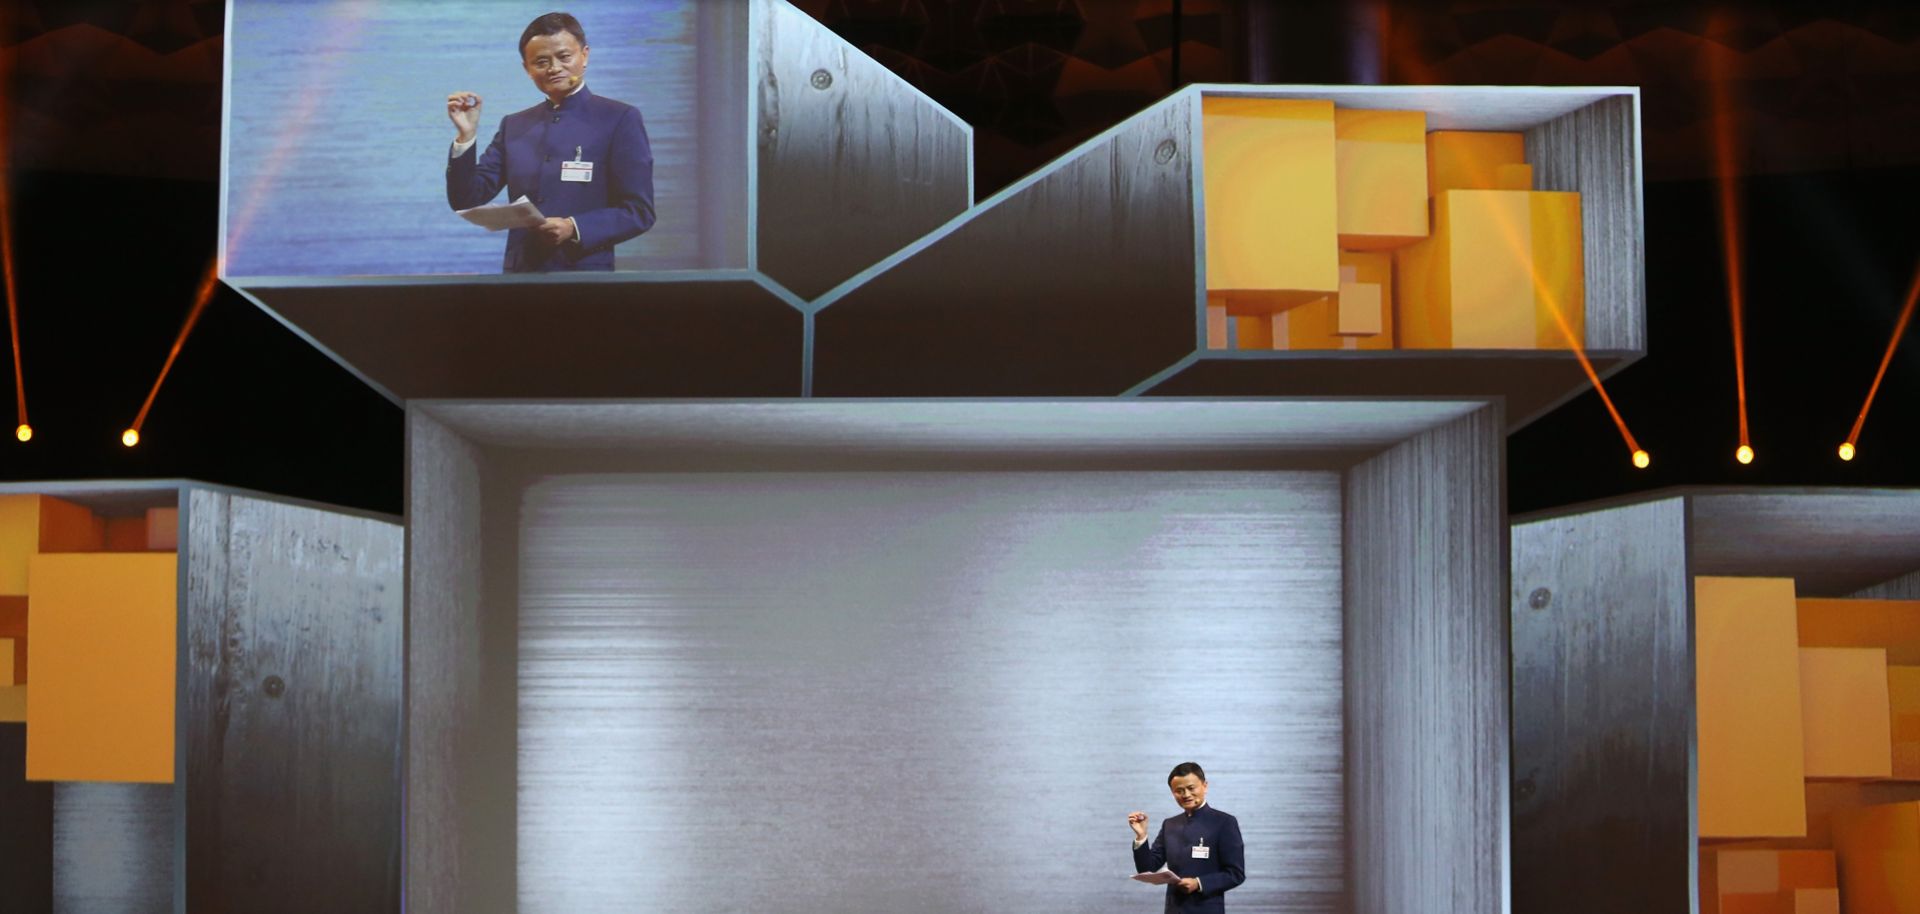 Jack Ma, chairman of China's Alibaba Group, speaks at the 2015 CeBIT expo in Hannover, Germany.